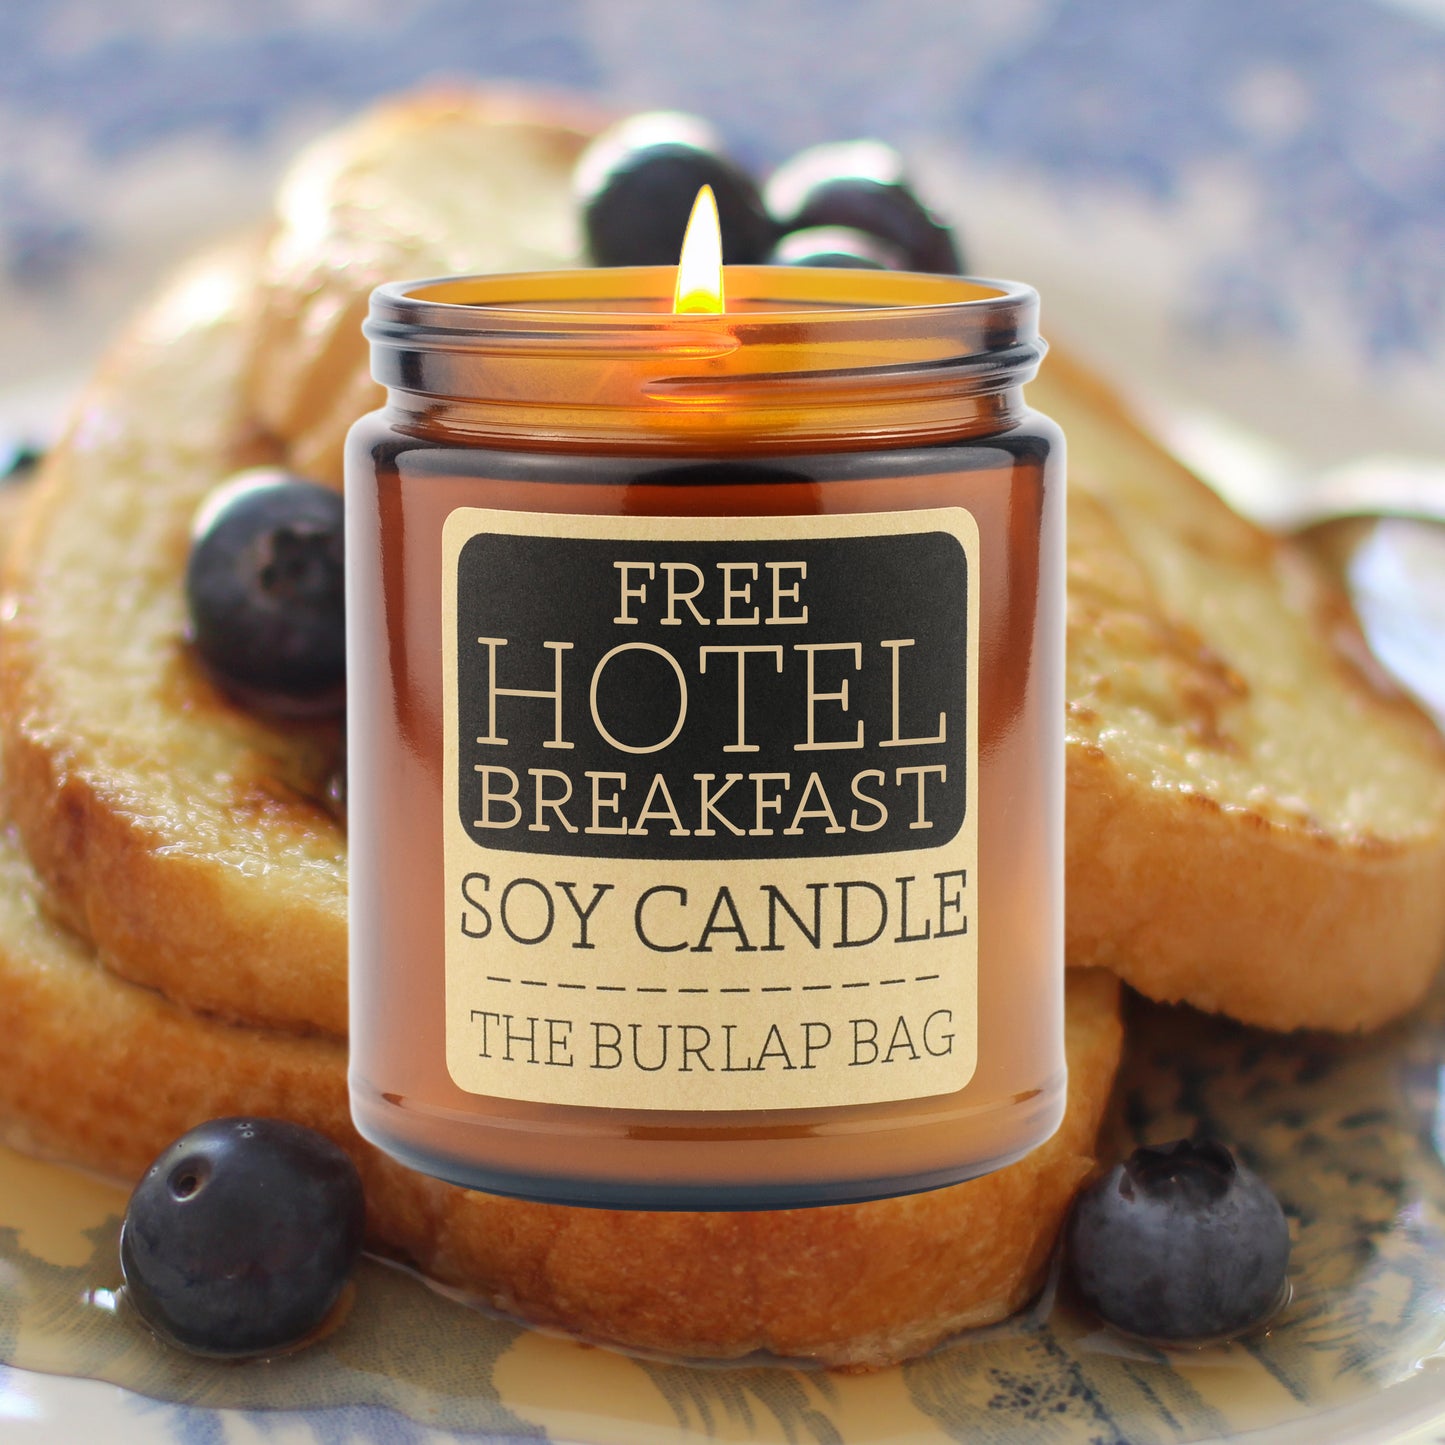 Free Hotel Breakfast - Soy Candle 9oz